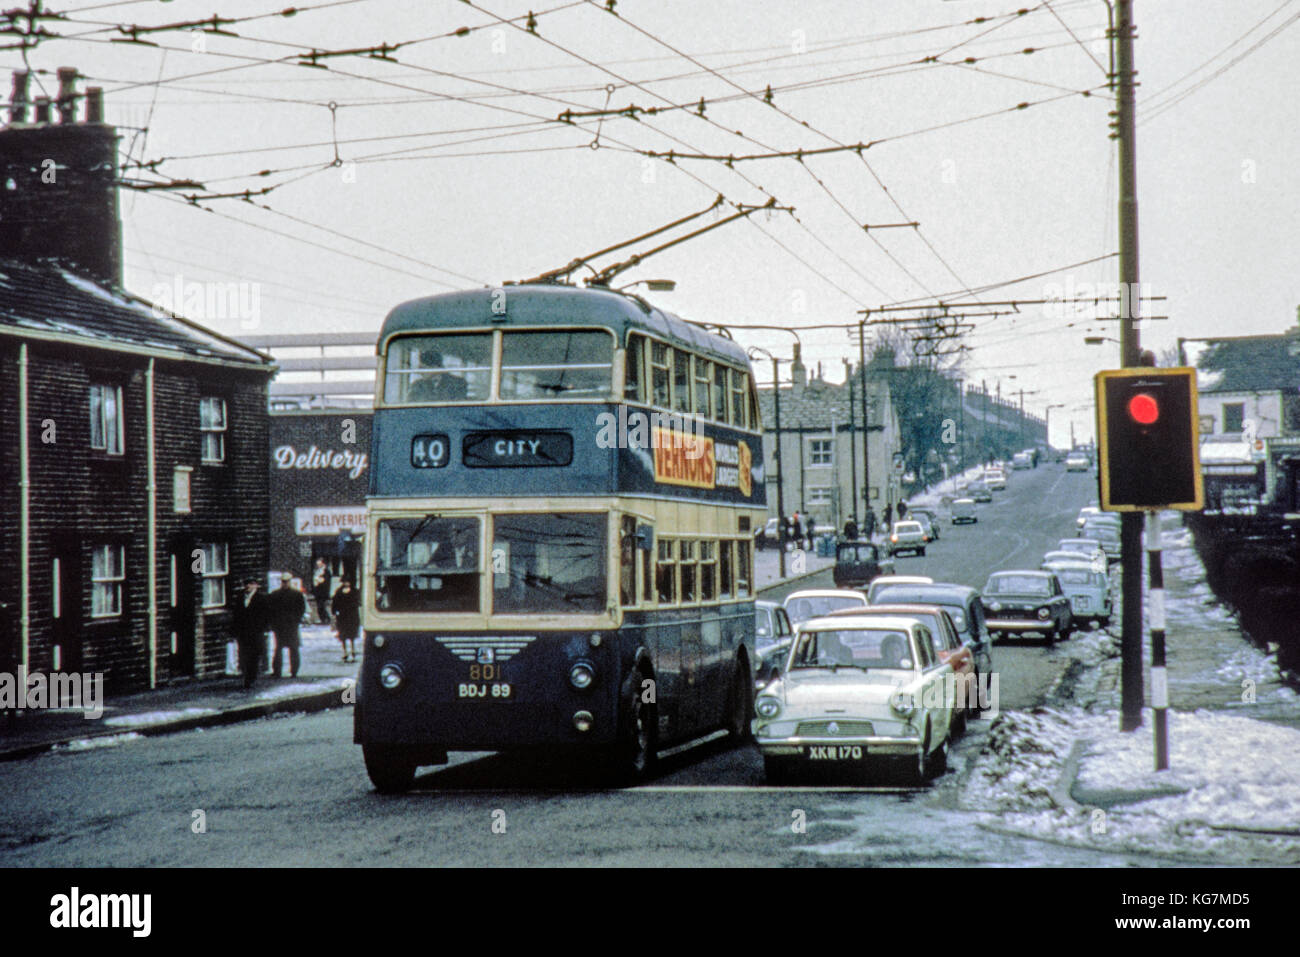 Bradford Trolley Bus No 801 Reg No BDJ 89 on route to the city center in 1962 Stock Photo